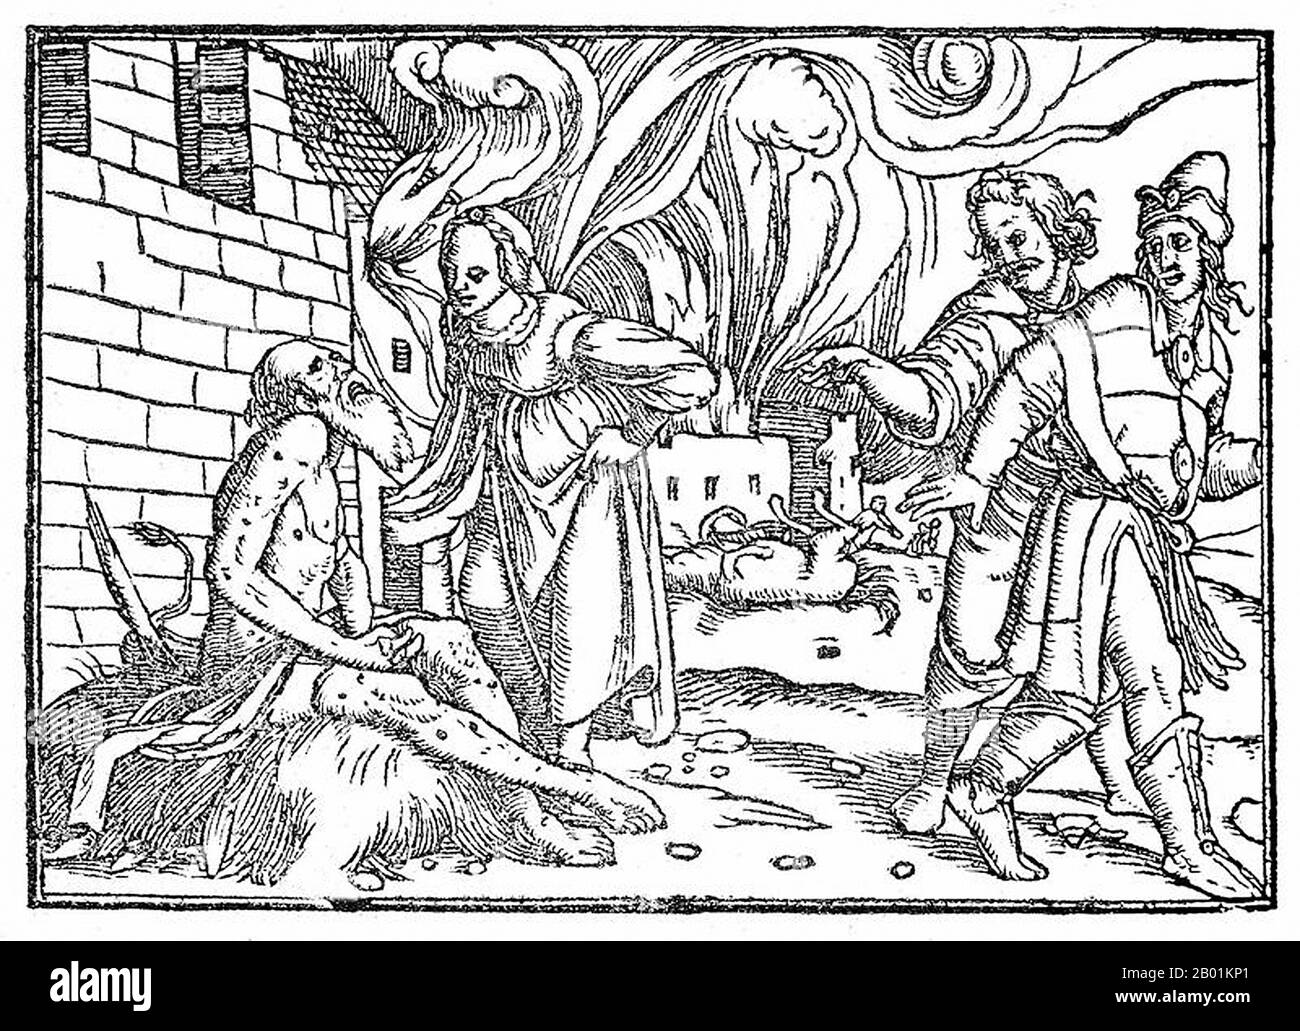 France: Job, afflicted with sores as his house burns, is mocked by his wife and friends. Wood engraving from the Biblia Sacra by Jean Benoit (1484-1573), early 16th century.  Job is the central character of the Book of Job in the Hebrew Bible. Job is also recognised as a prophet of God in the Qur'an.  The Book of Job begins with an introduction to Job's character. He is described as a blessed man who lives righteously. God's praise of Job prompts Satan to challenge Job's integrity and suggesting that Job serves God simply because he protects him. God removes Job's protection. Stock Photo